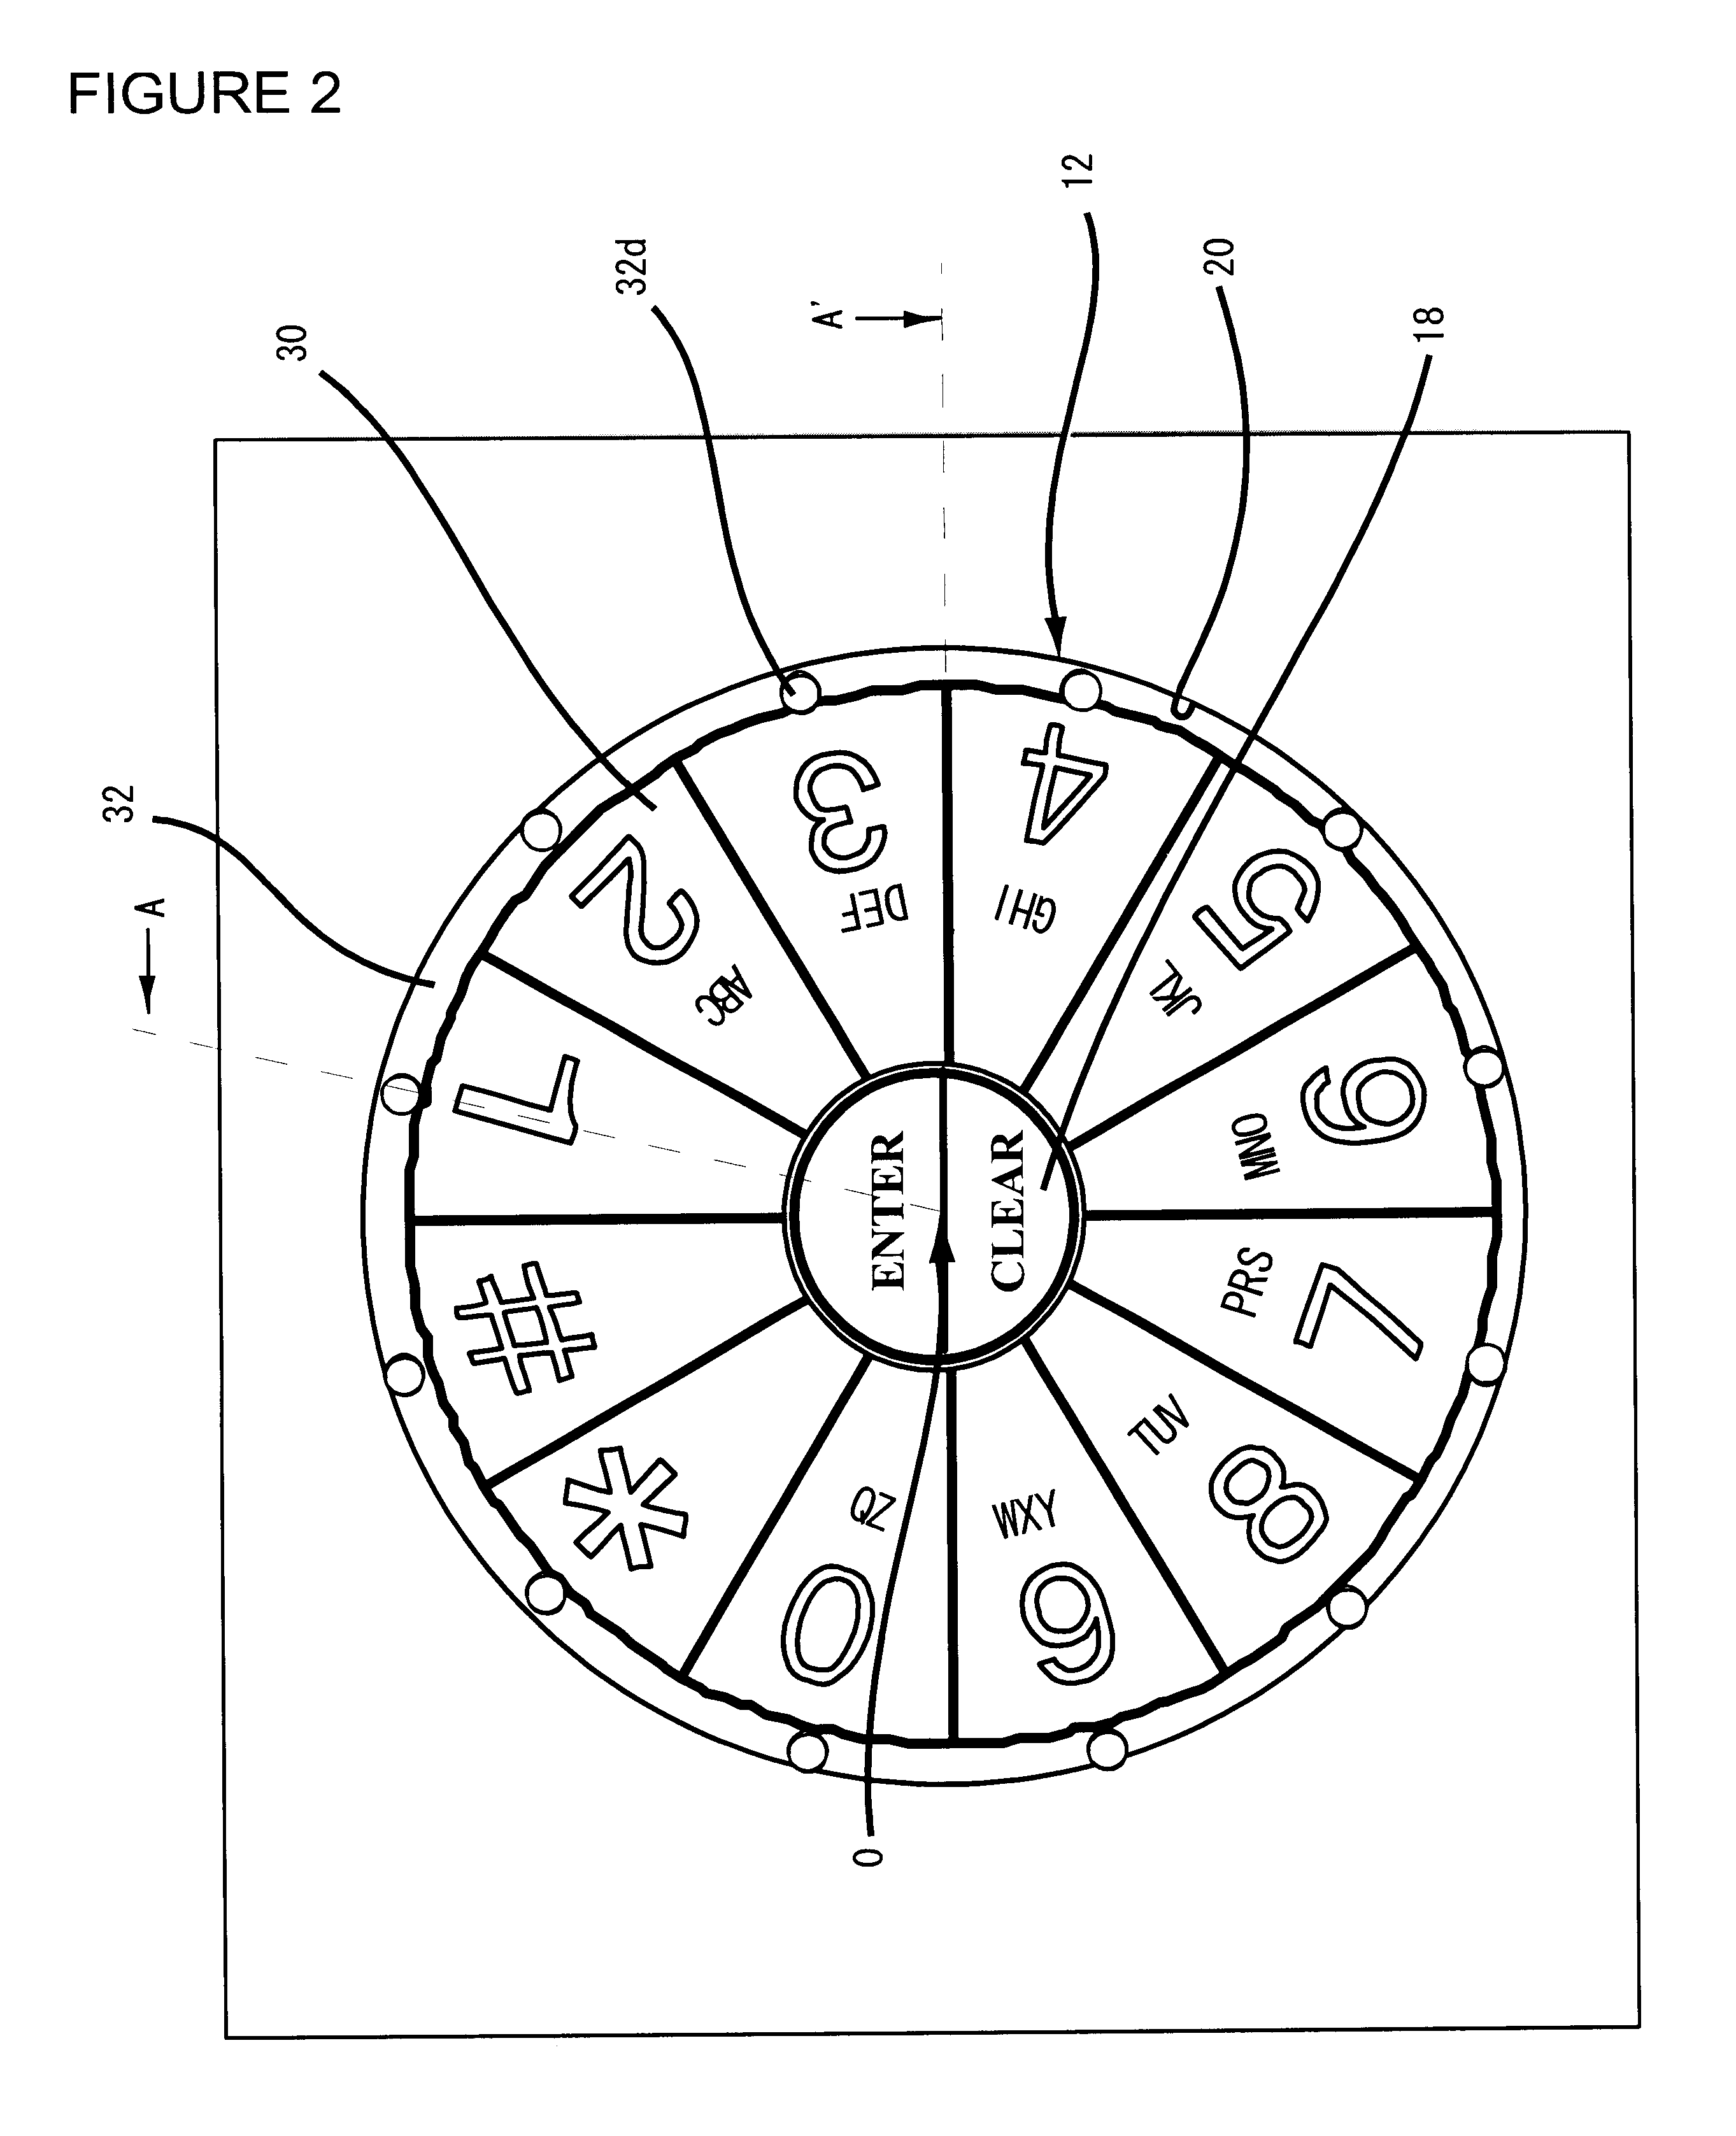 Information entry device